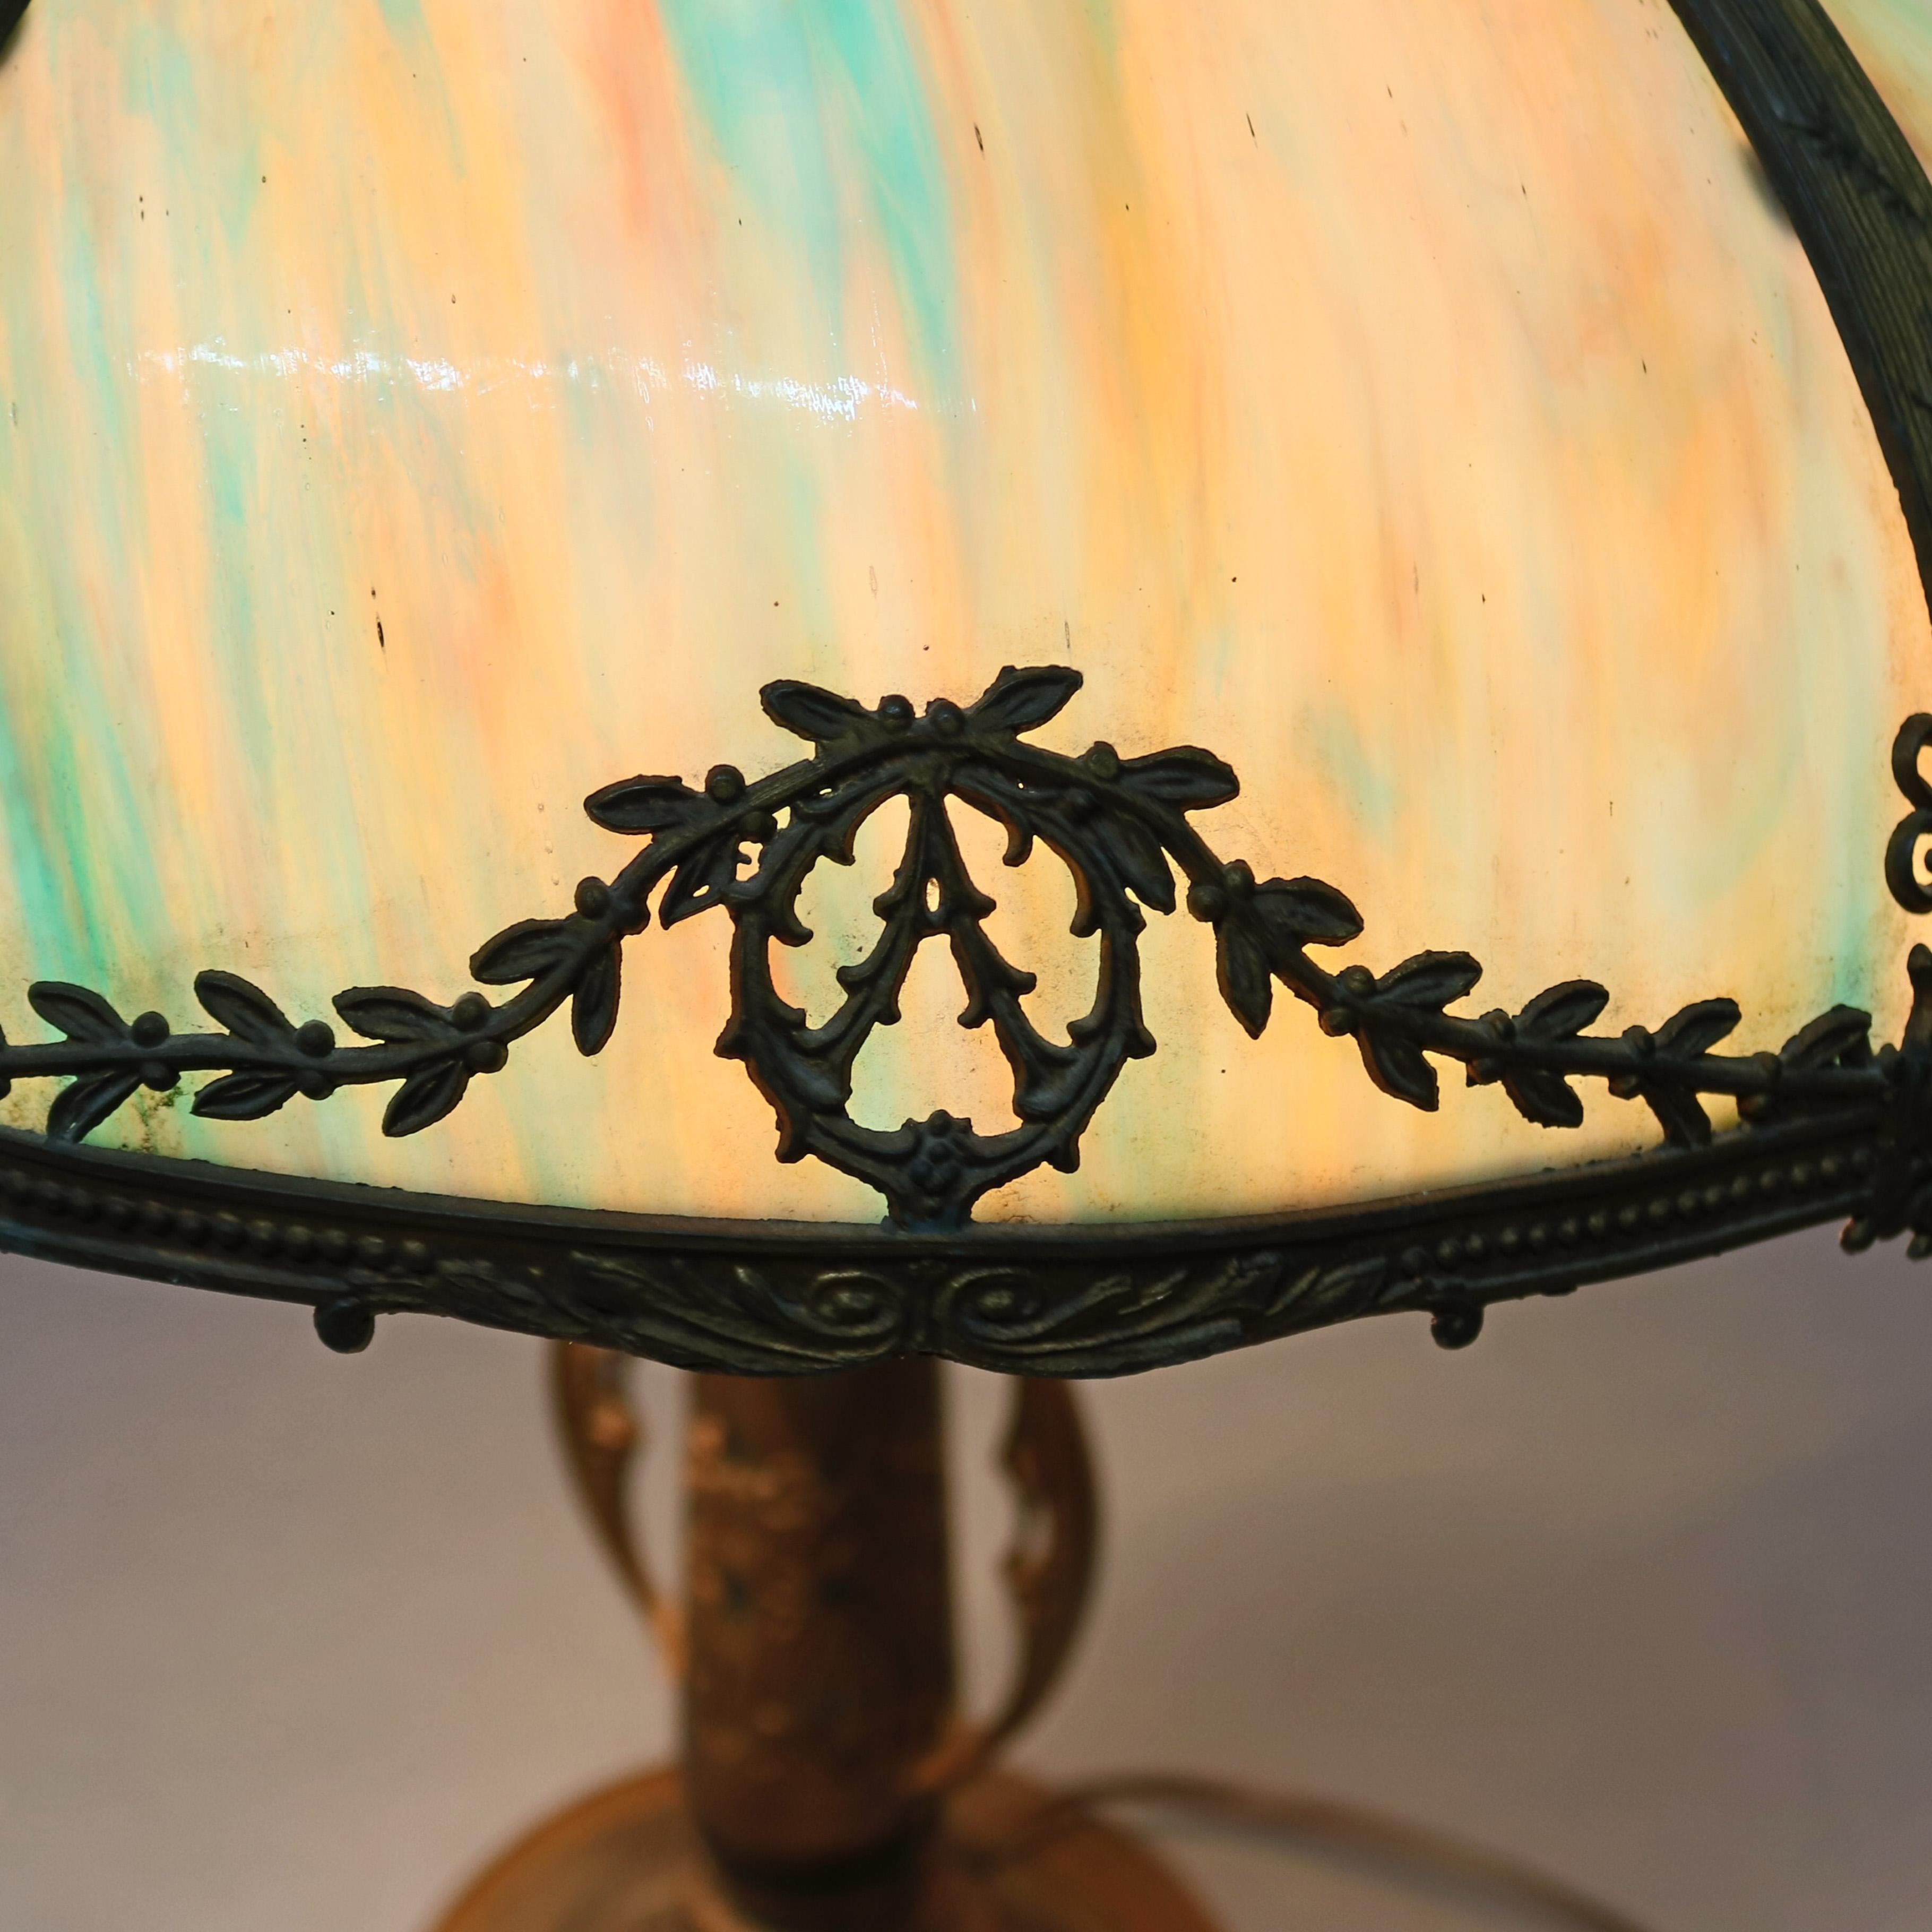 American Antique Arts & Crafts Slag Glass Table Lamp by Bradley & Hubbard, c1920